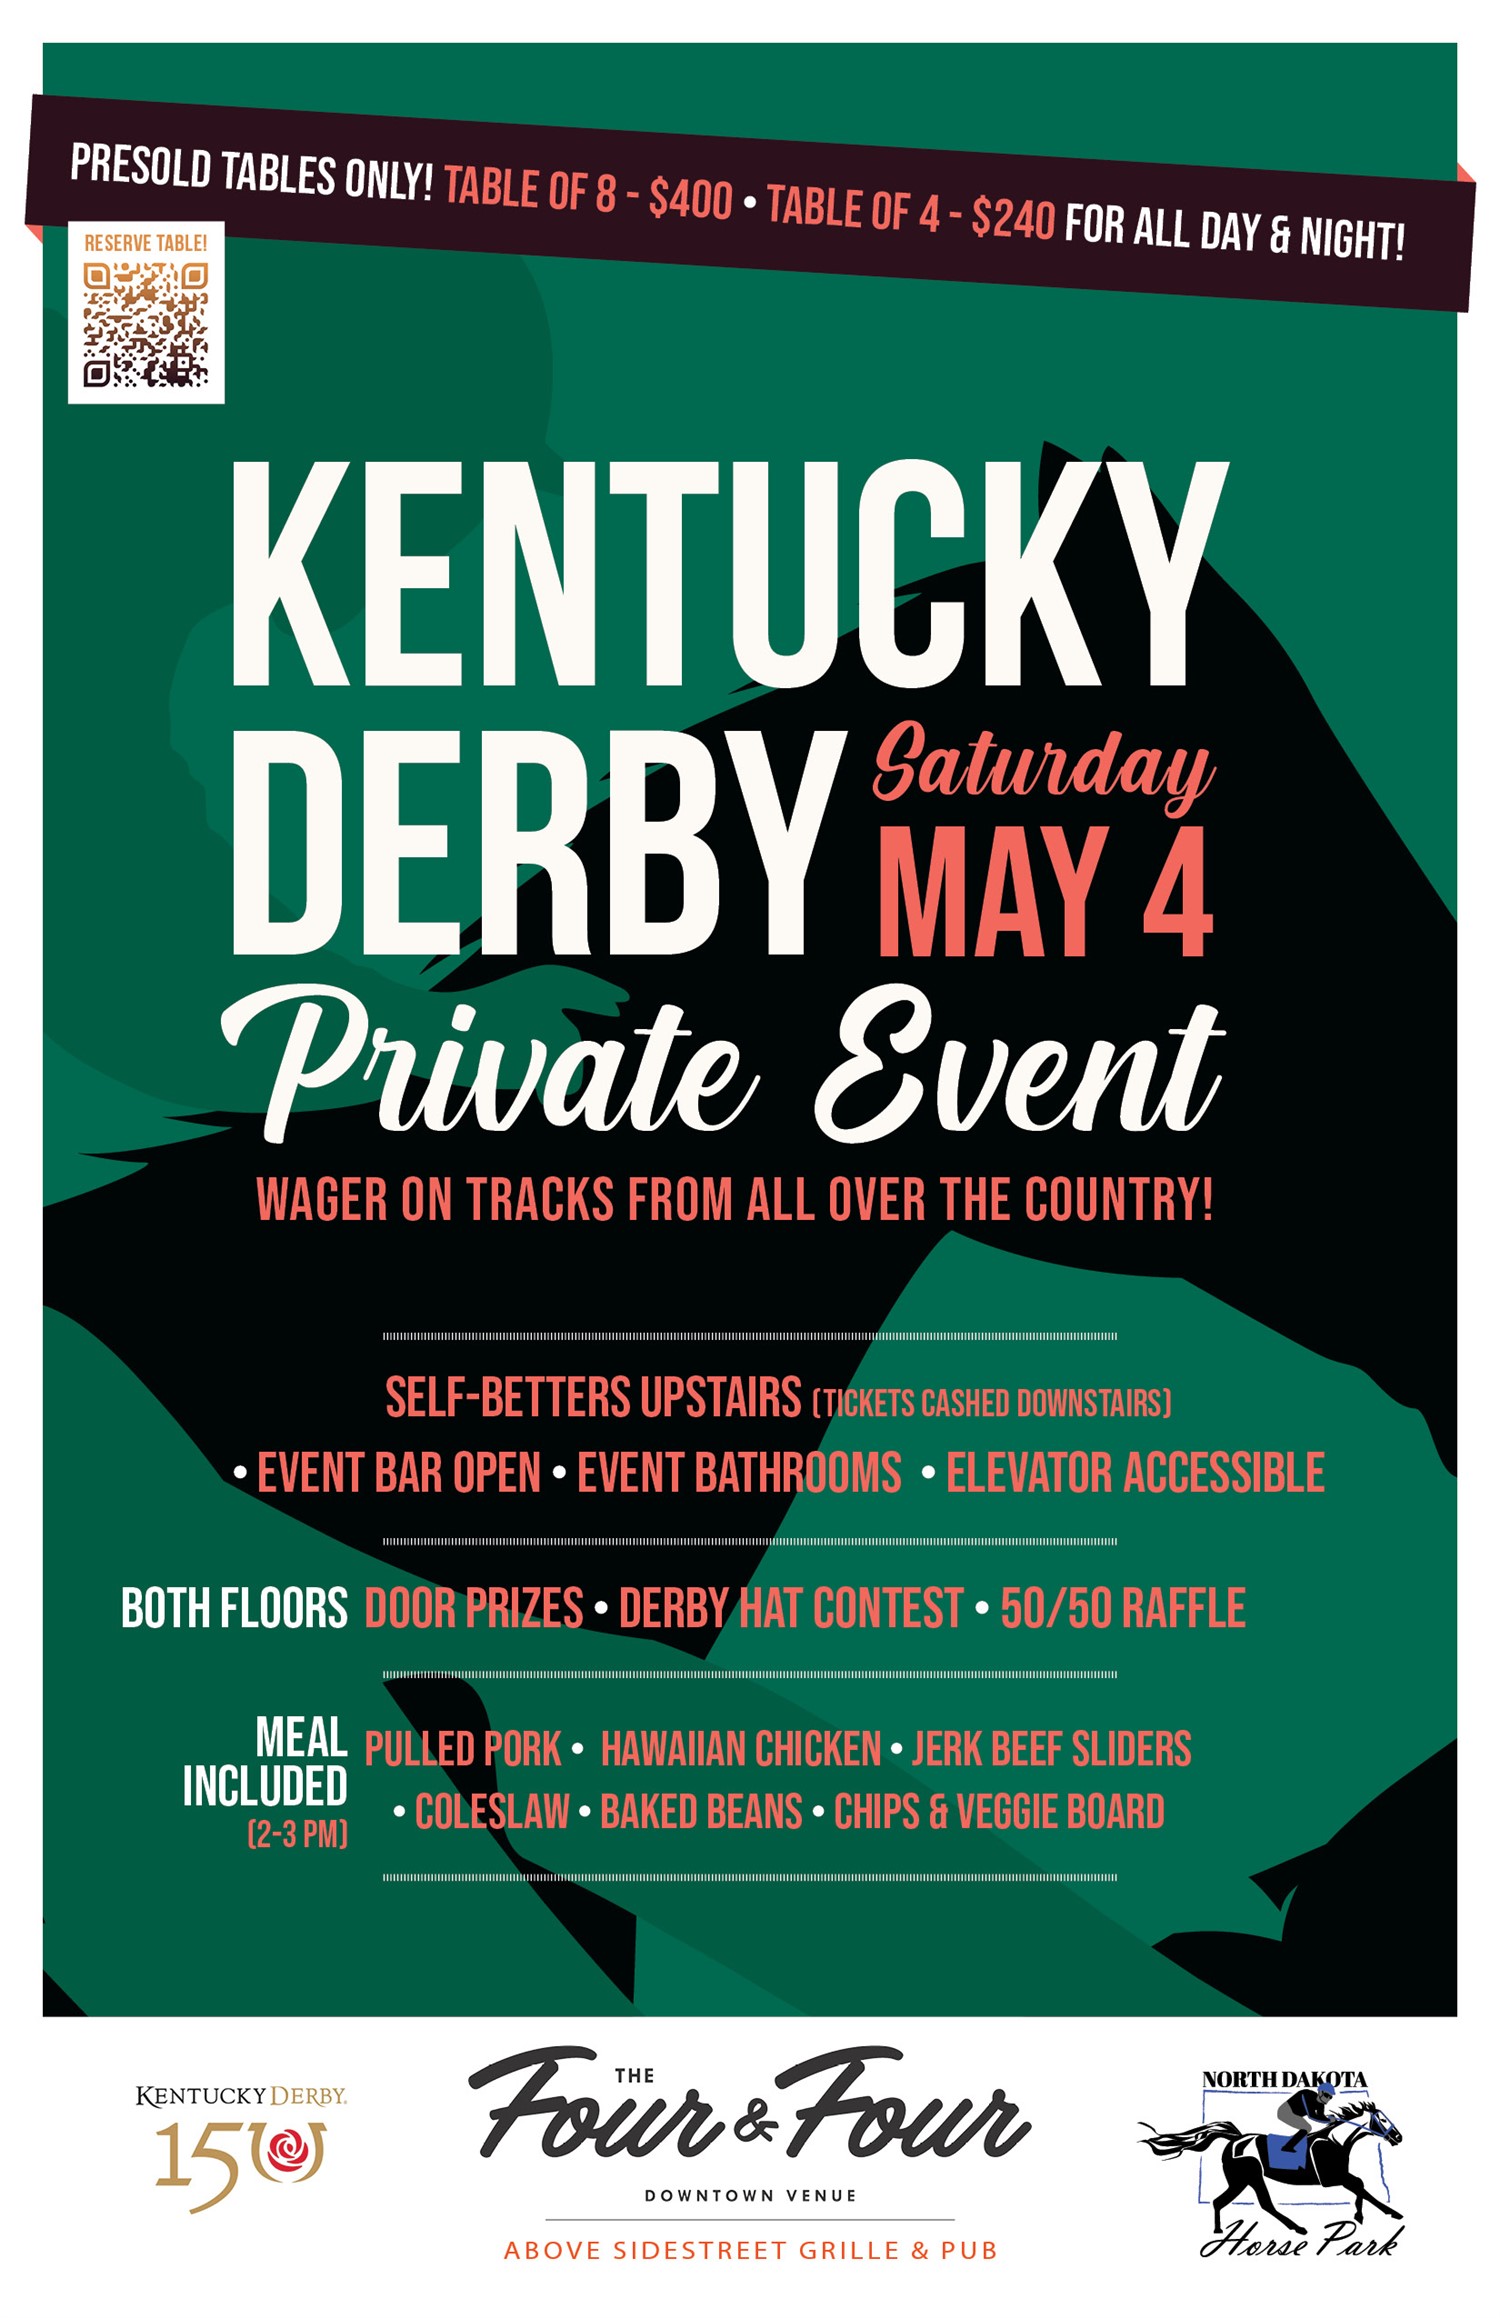 Kentucky Derby Private Event  on May 04, 10:00@The Four and Four, above Sidestreet Grille & Bar - Buy tickets and Get information on Sidestreet Live / Four and Four 